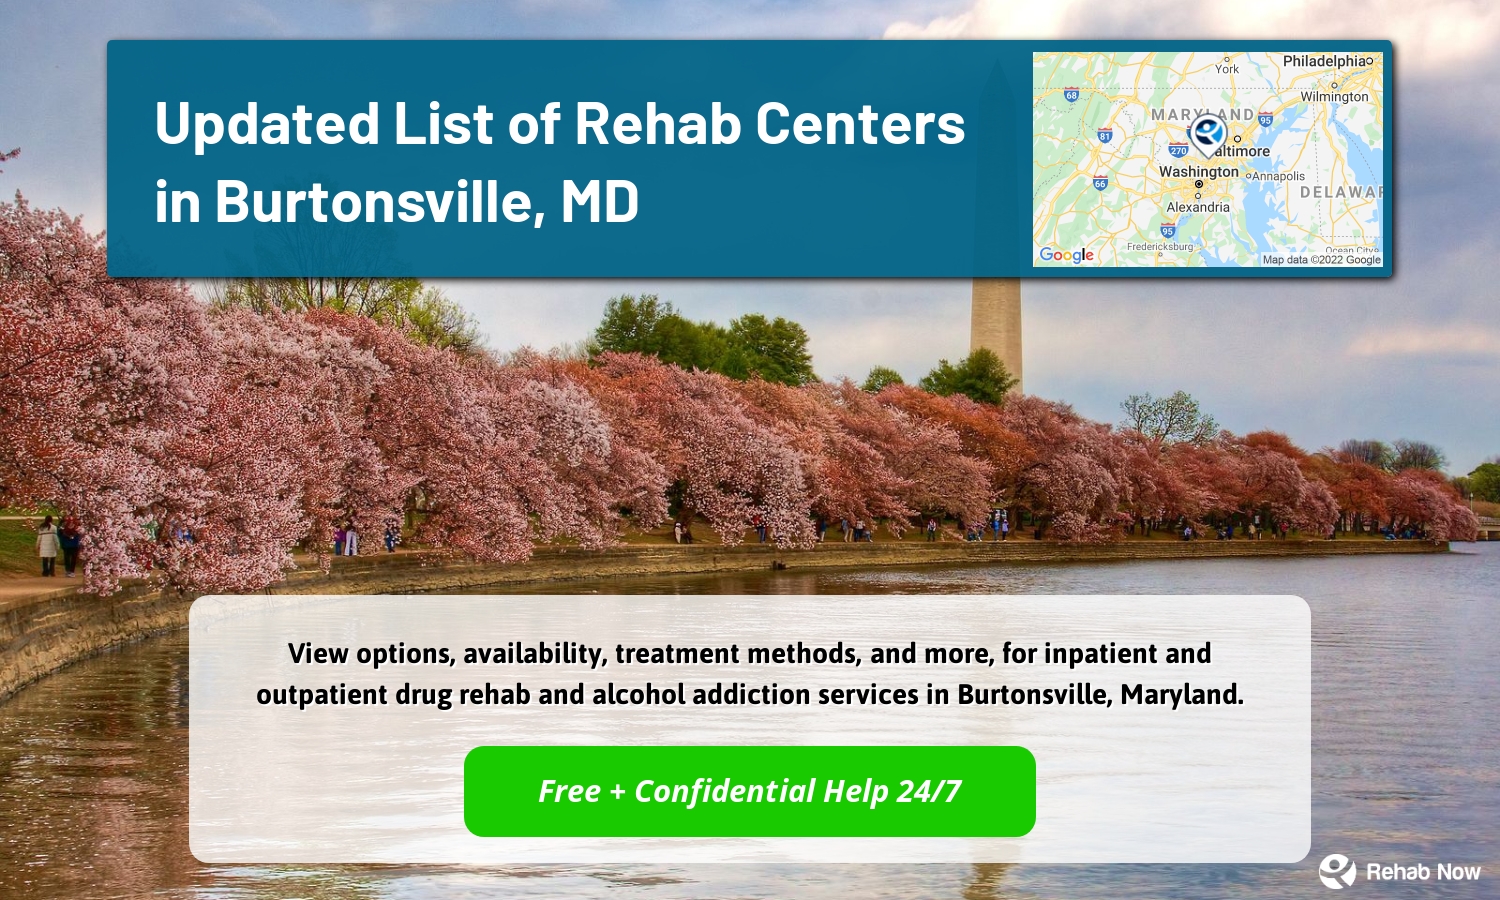 View options, availability, treatment methods, and more, for inpatient and outpatient drug rehab and alcohol addiction services in Burtonsville, Maryland.